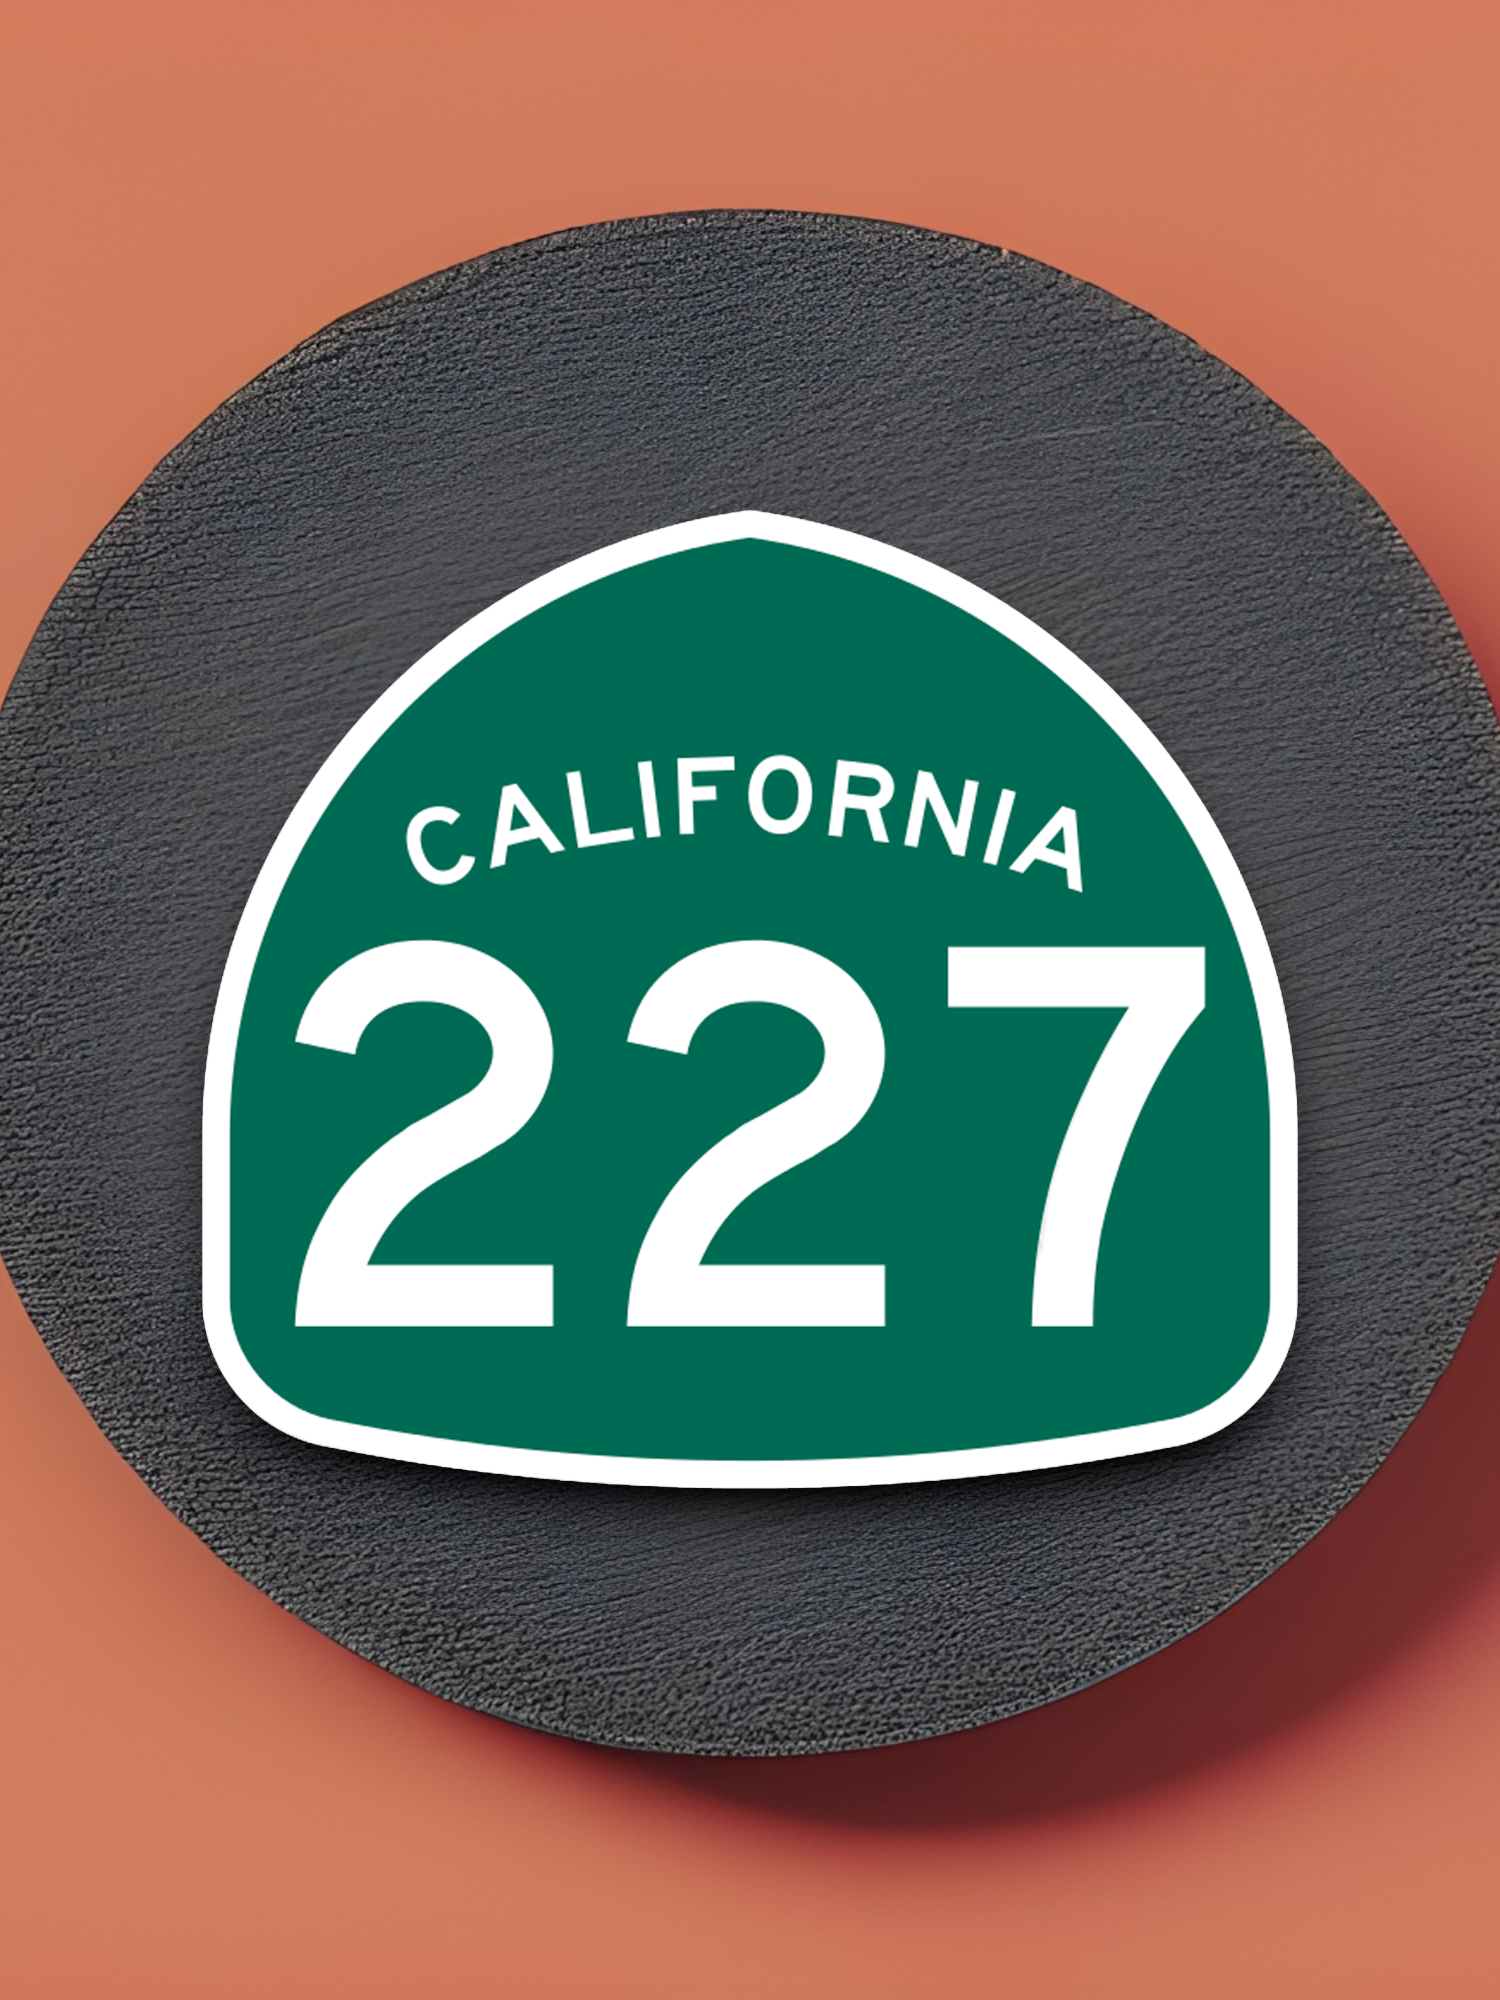 California State Route 227 Road Sign Sticker